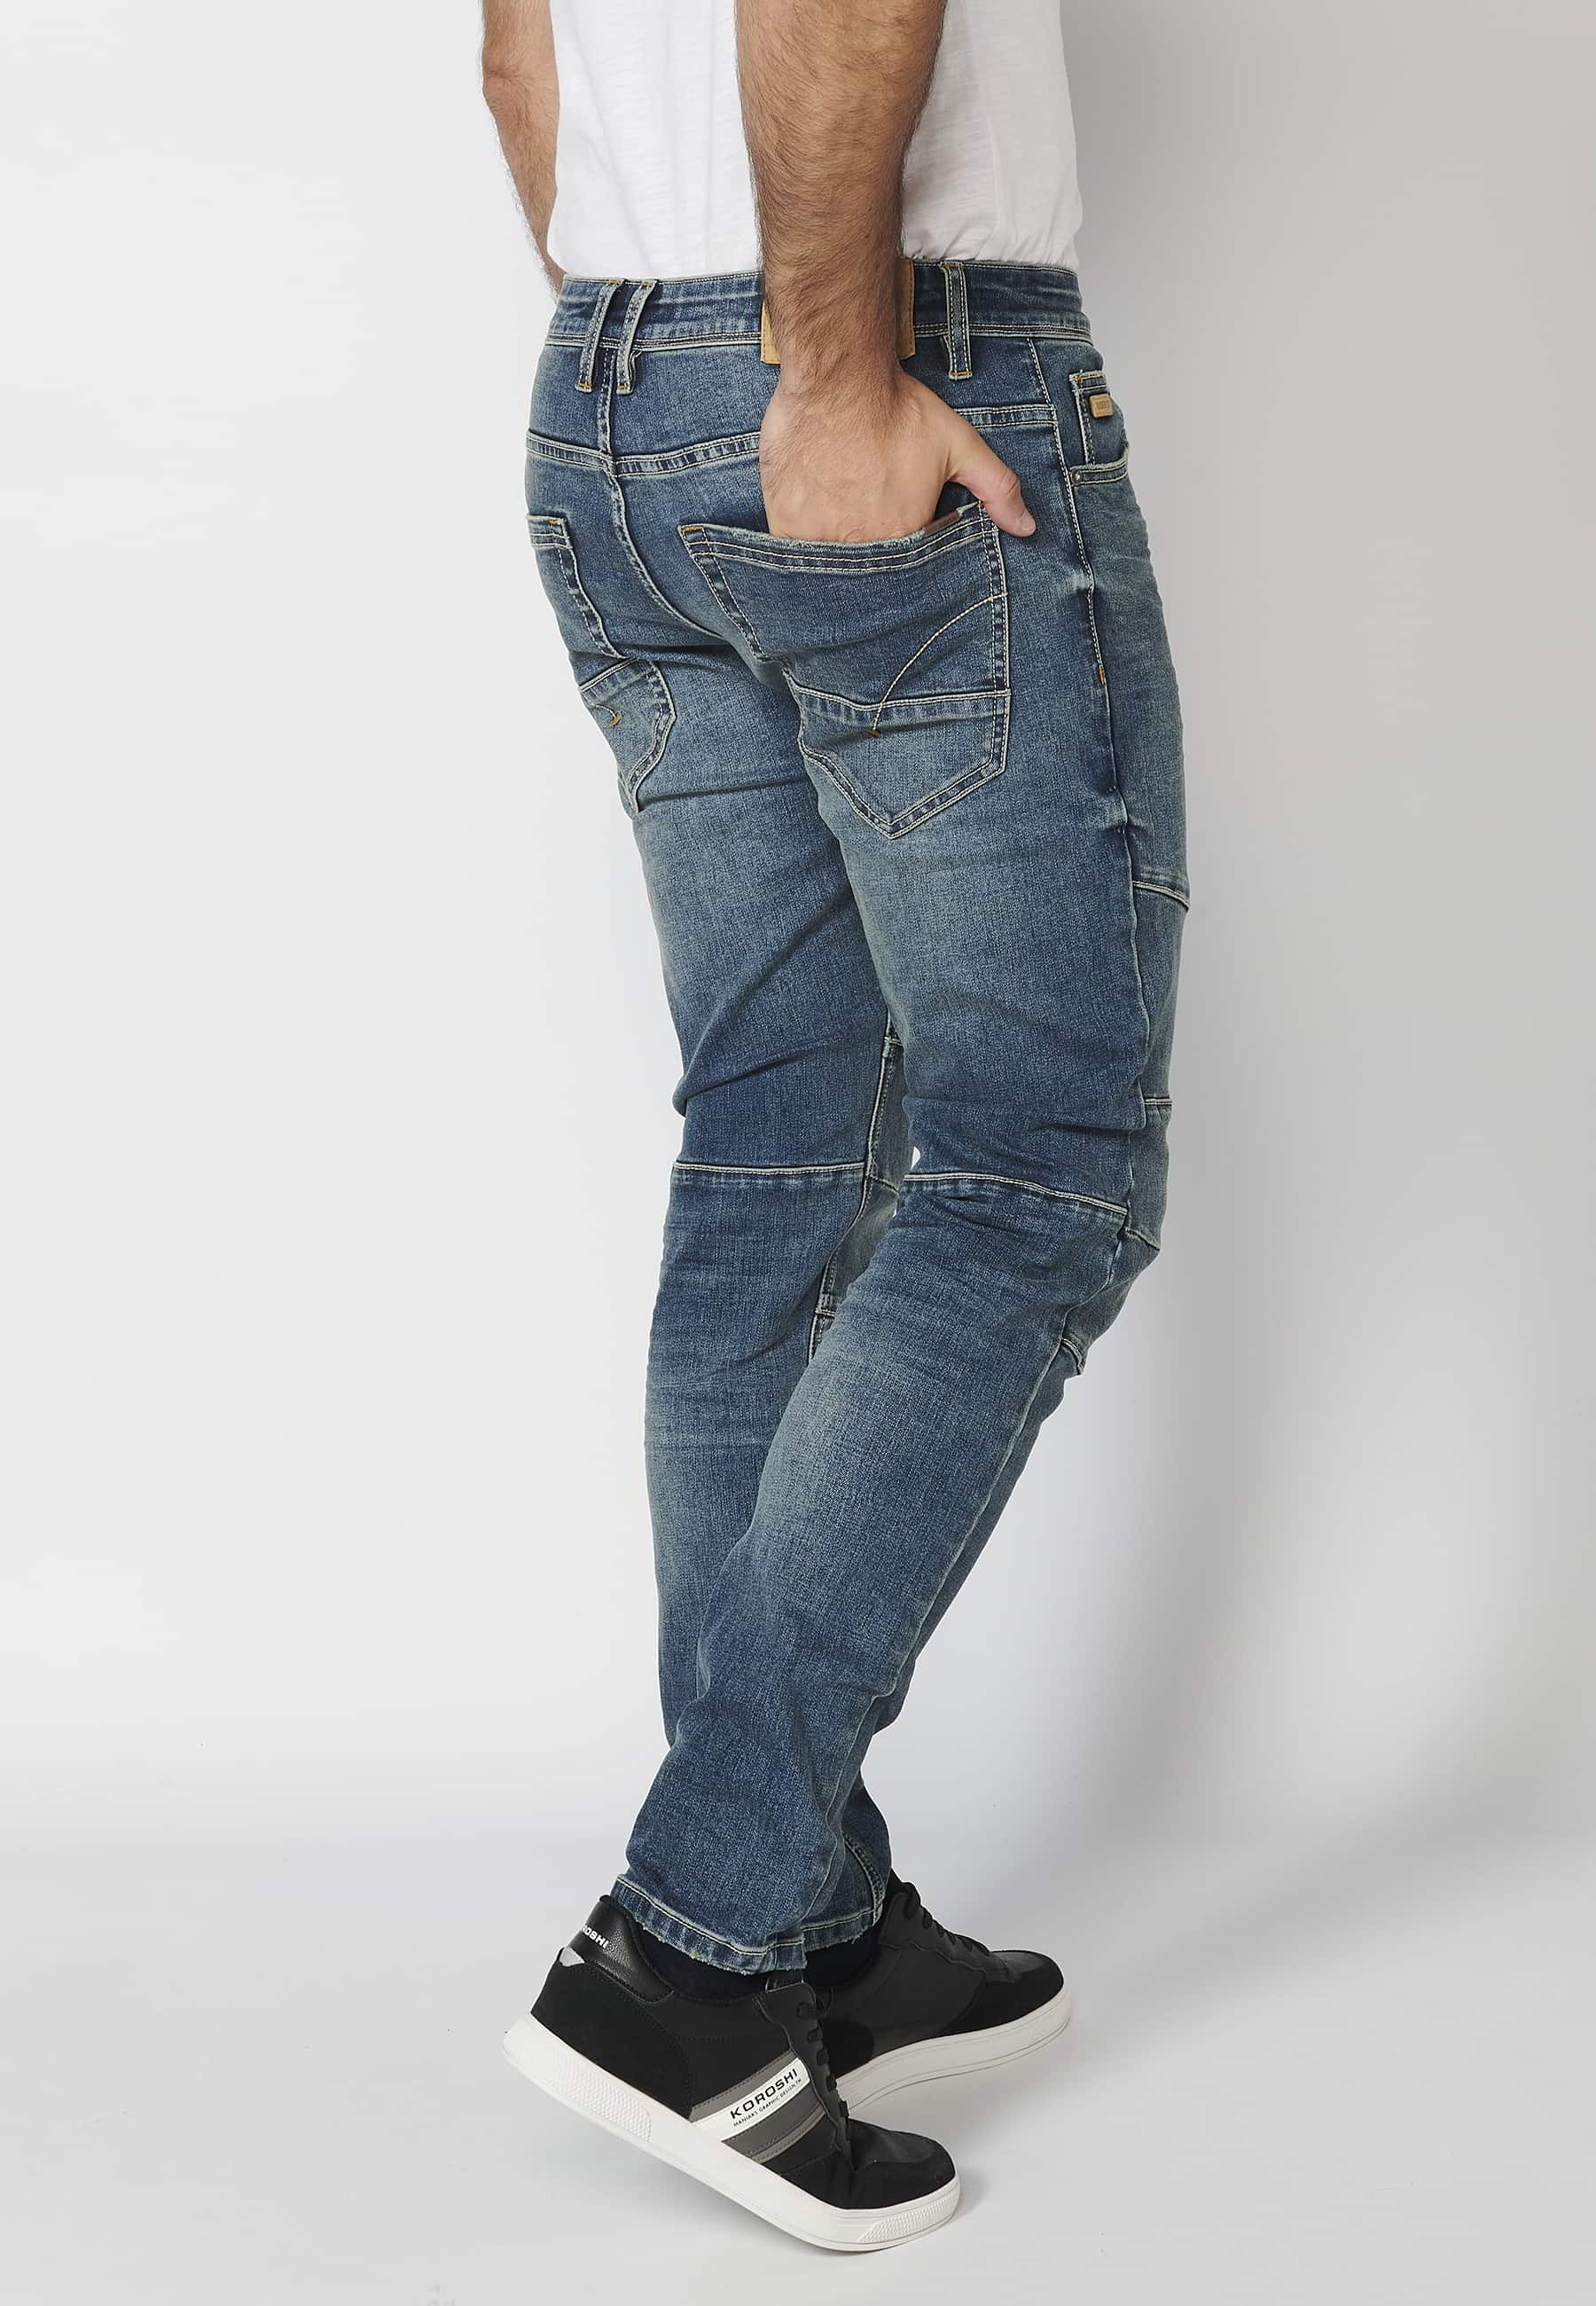 Blue skinny fit biker jean pants with details on the knees and five pockets for Men 5